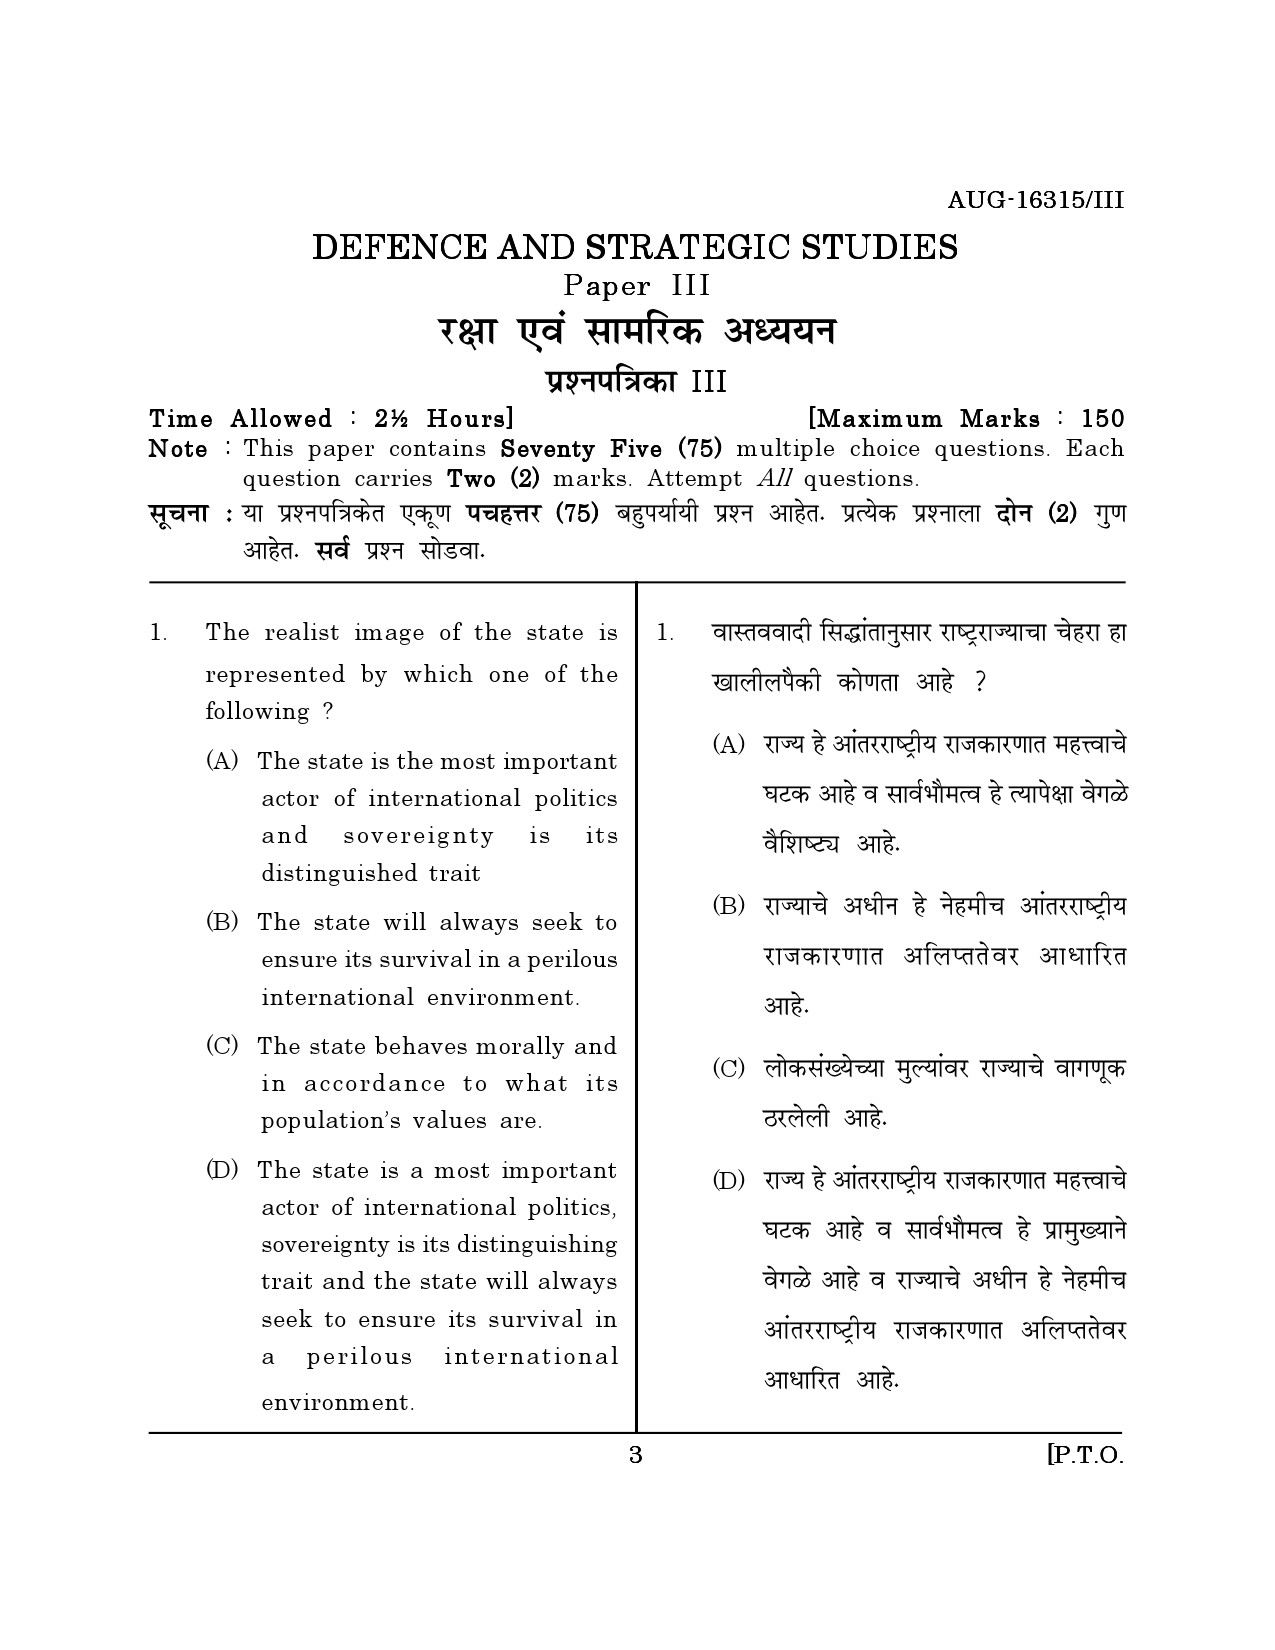 Maharashtra SET Defence and Strategic Studies Question Paper III August 2015 2